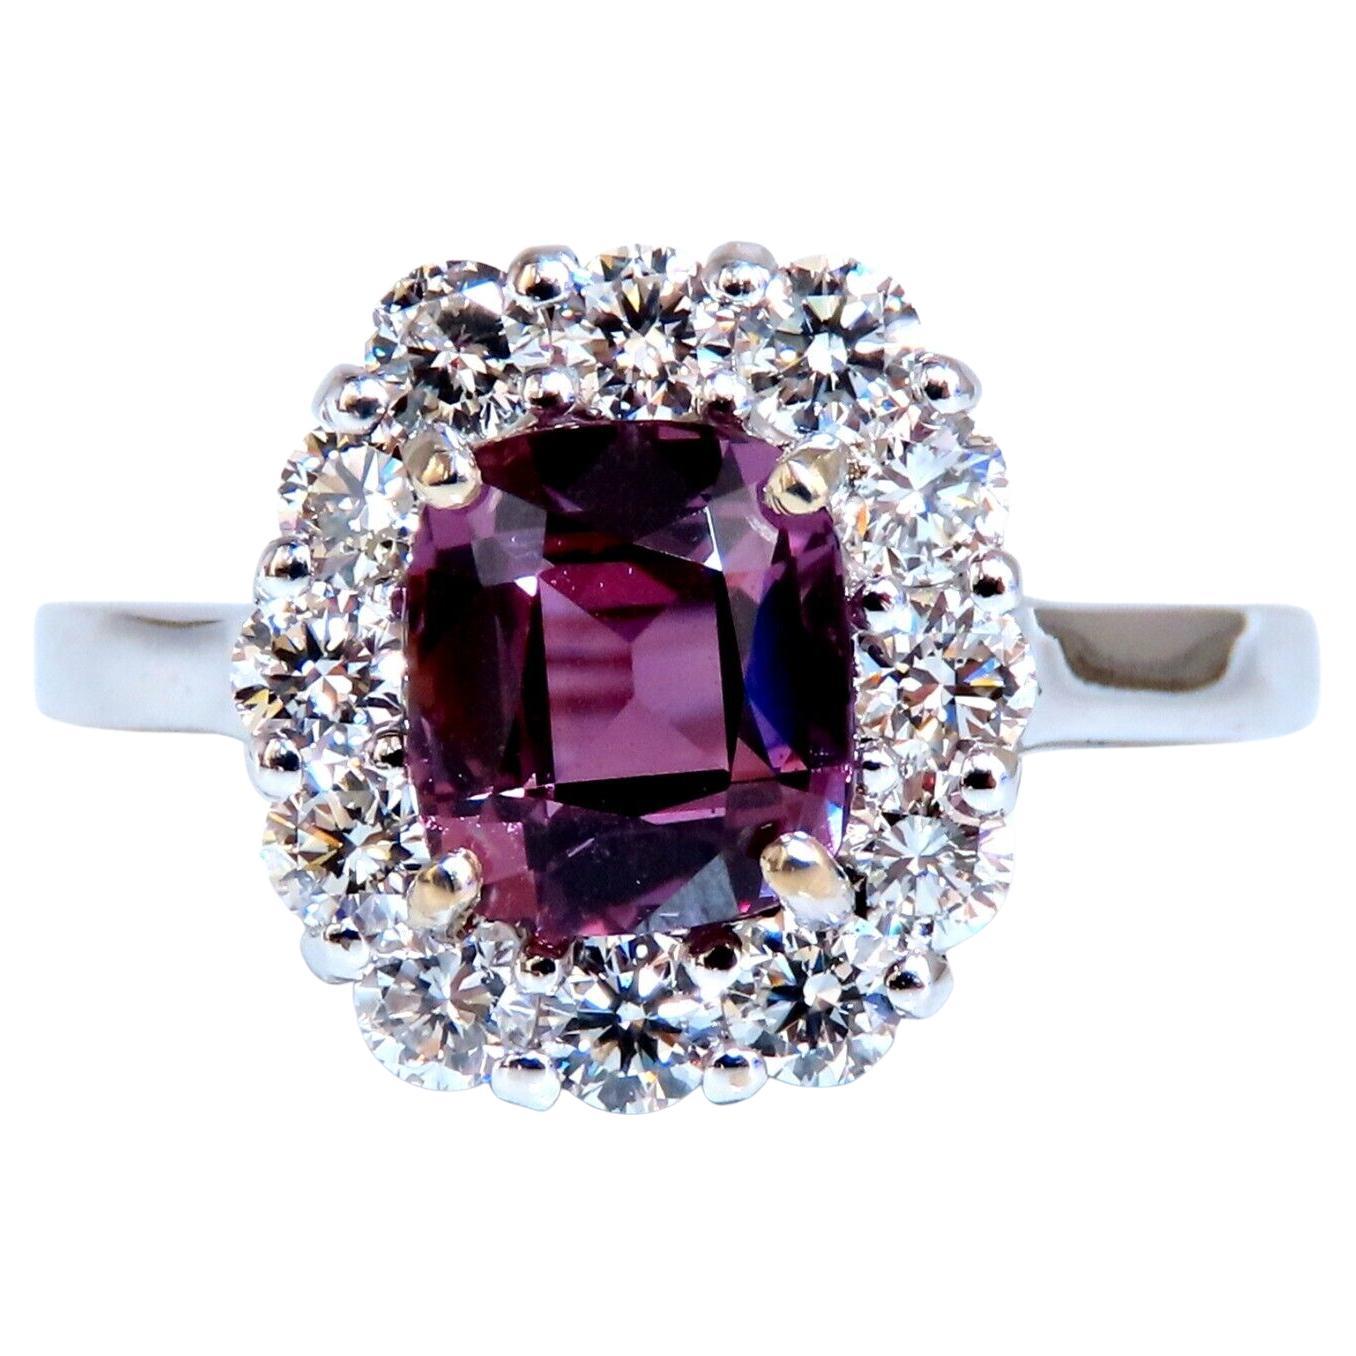 2.26ct GIA Certified Natural Purple Pink Sapphire Diamonds Ring 14kt